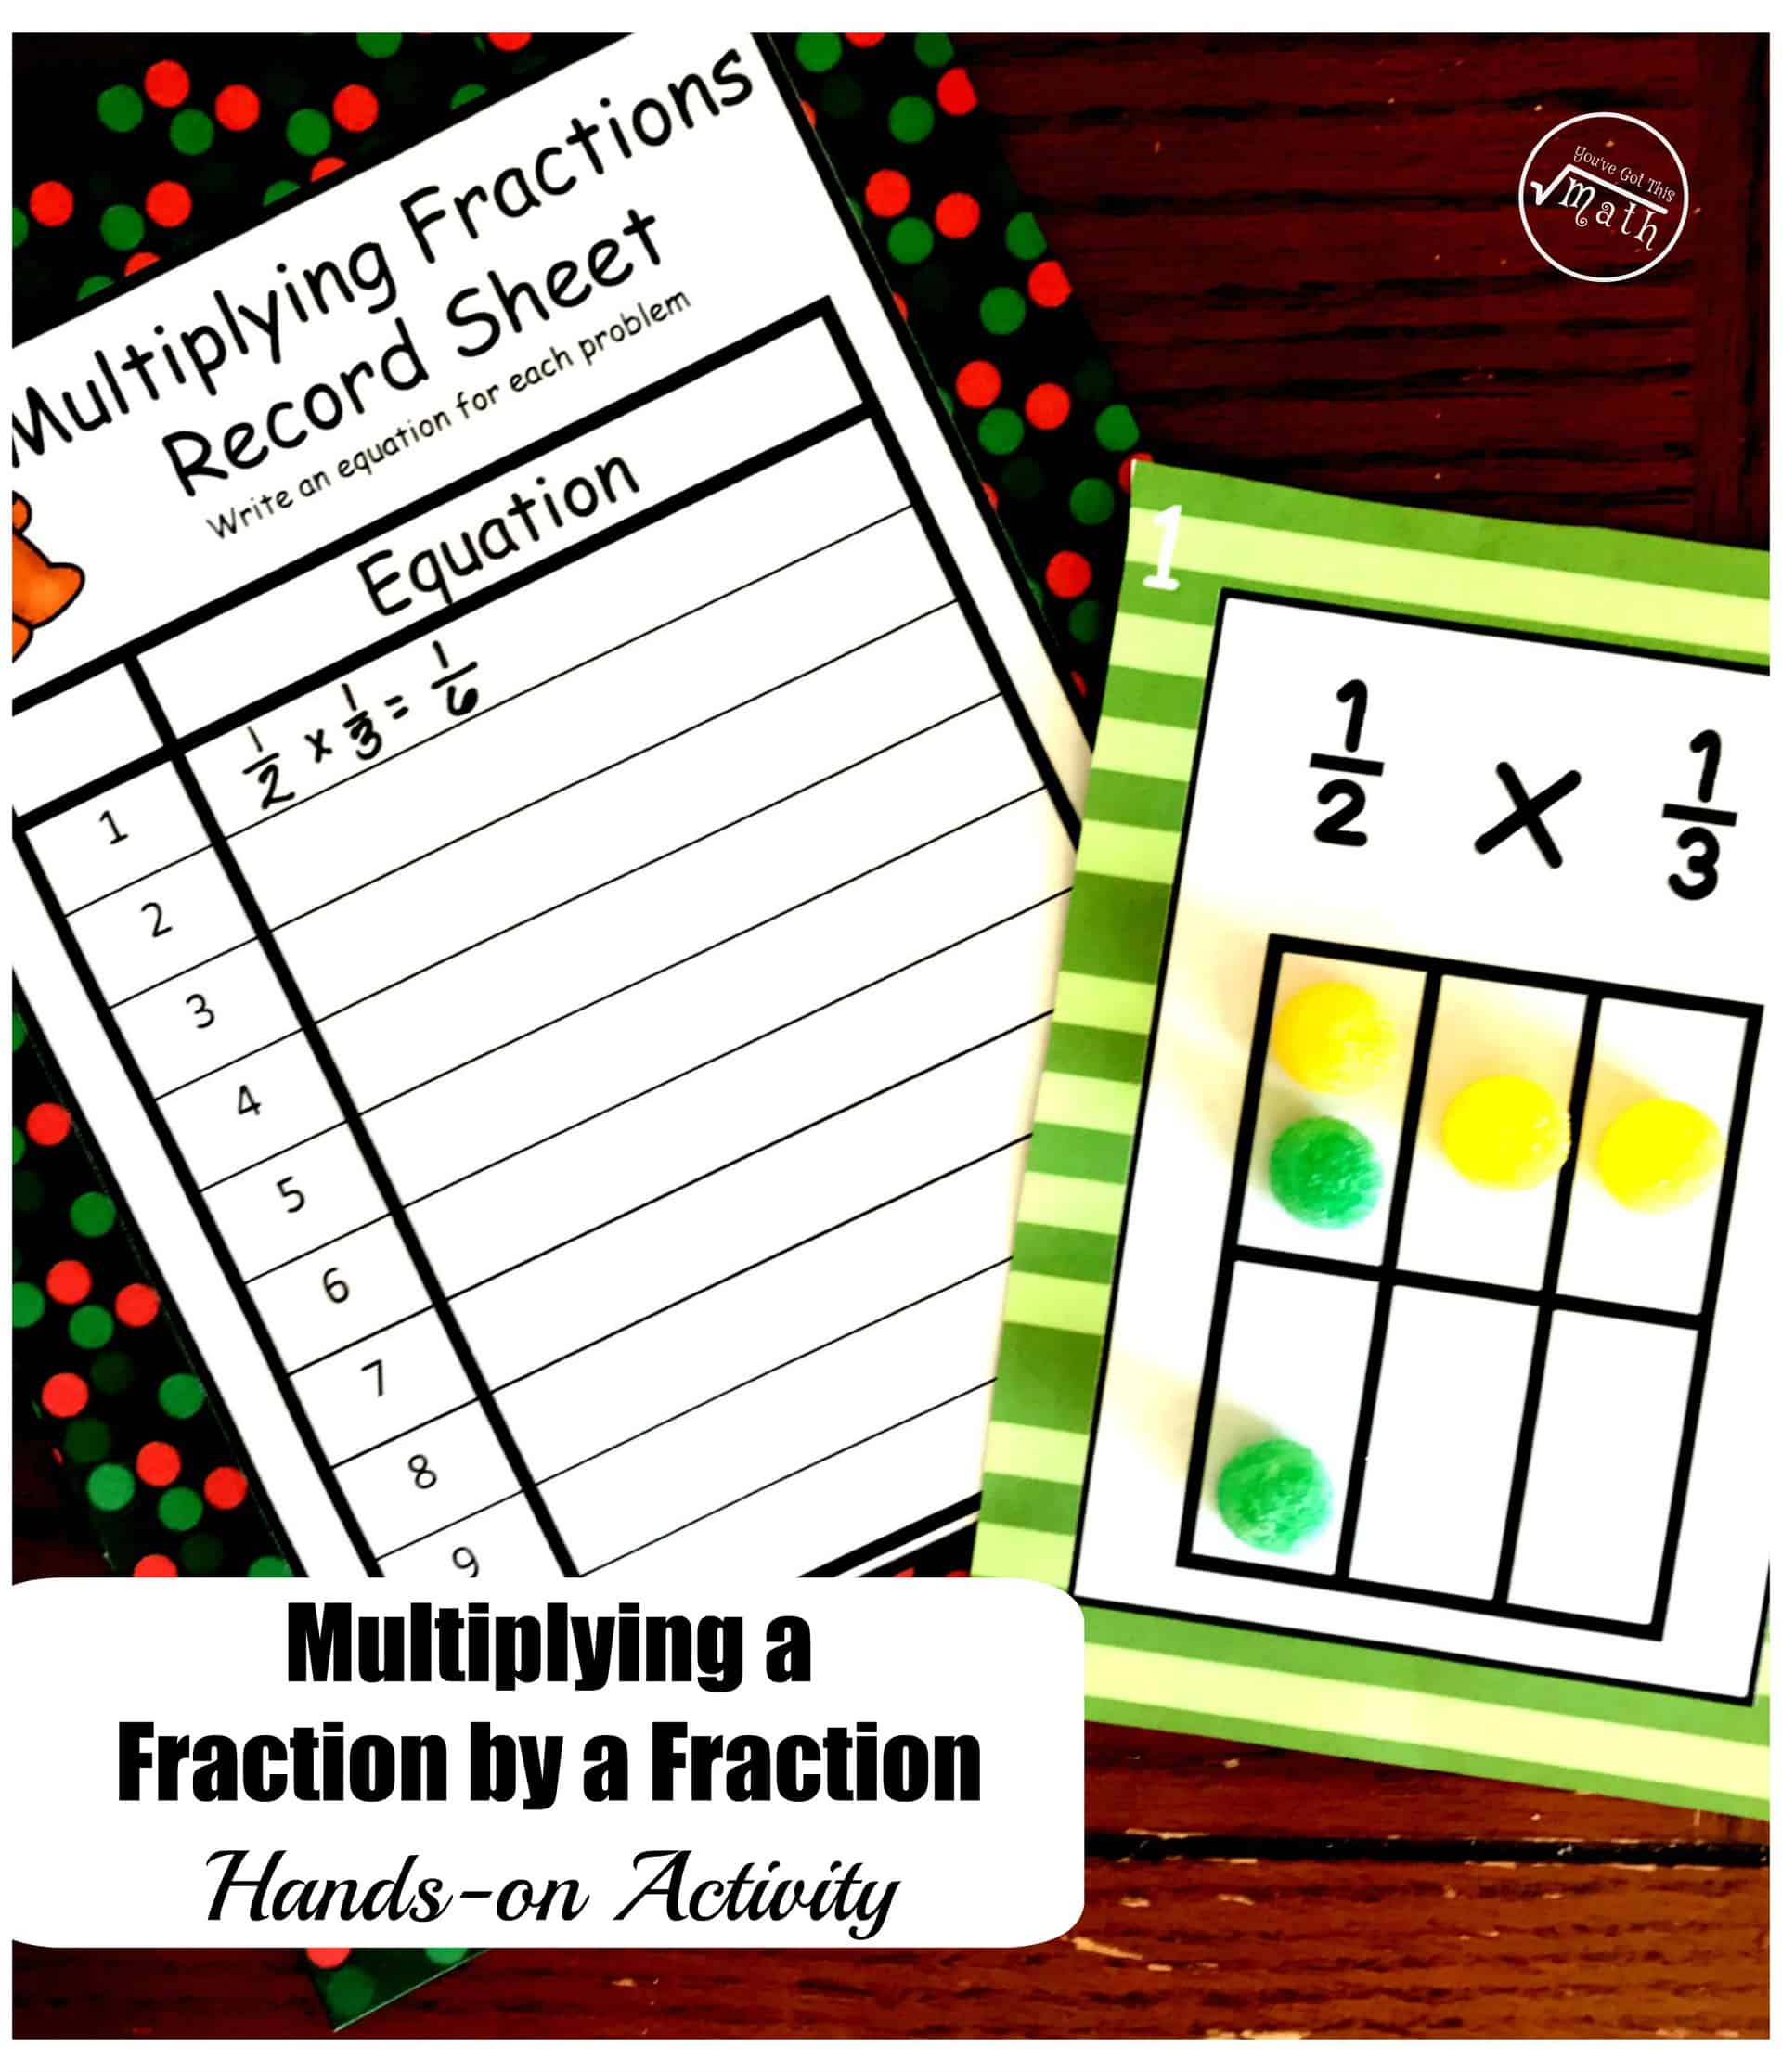 One Free, Hands - On Multiplying Fractions Activity